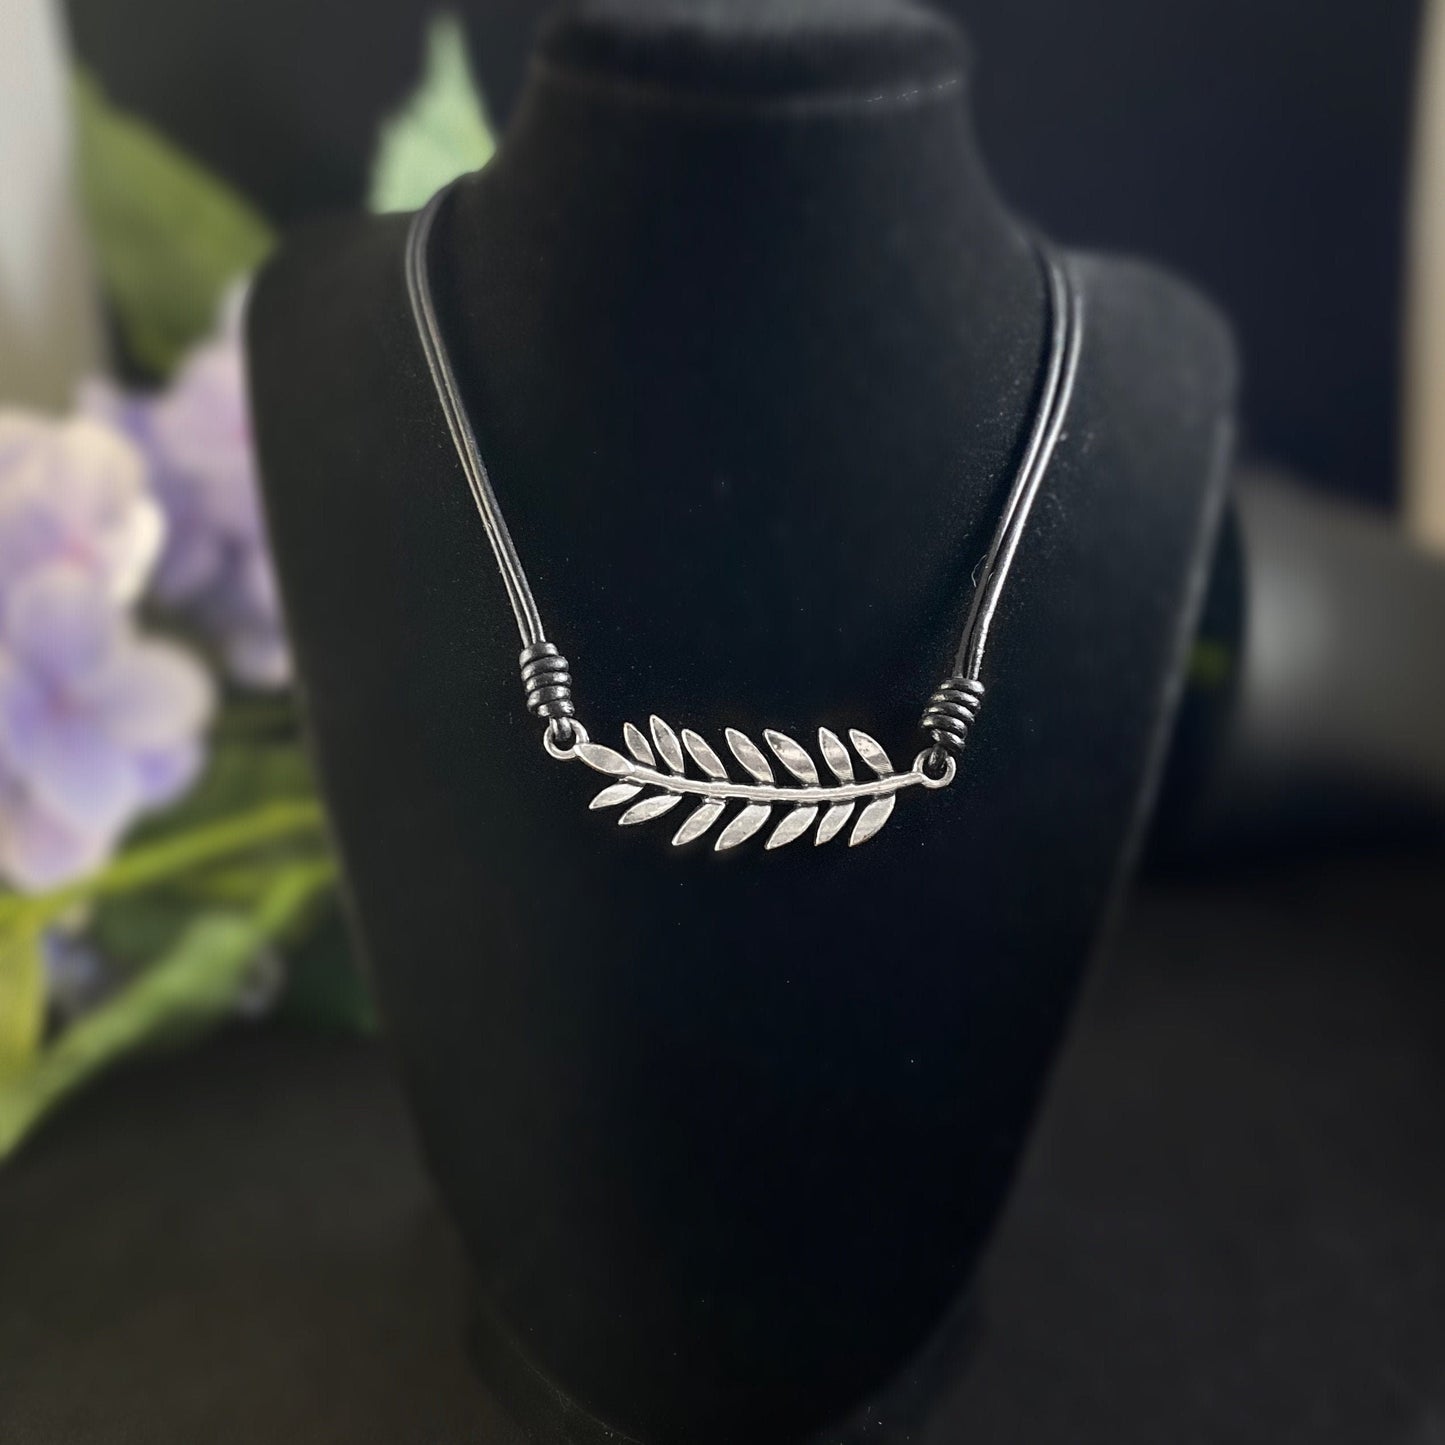 Silver Leaf Necklace with Black Leather Cord - Handmade Nickel Free Ulla Jewelry